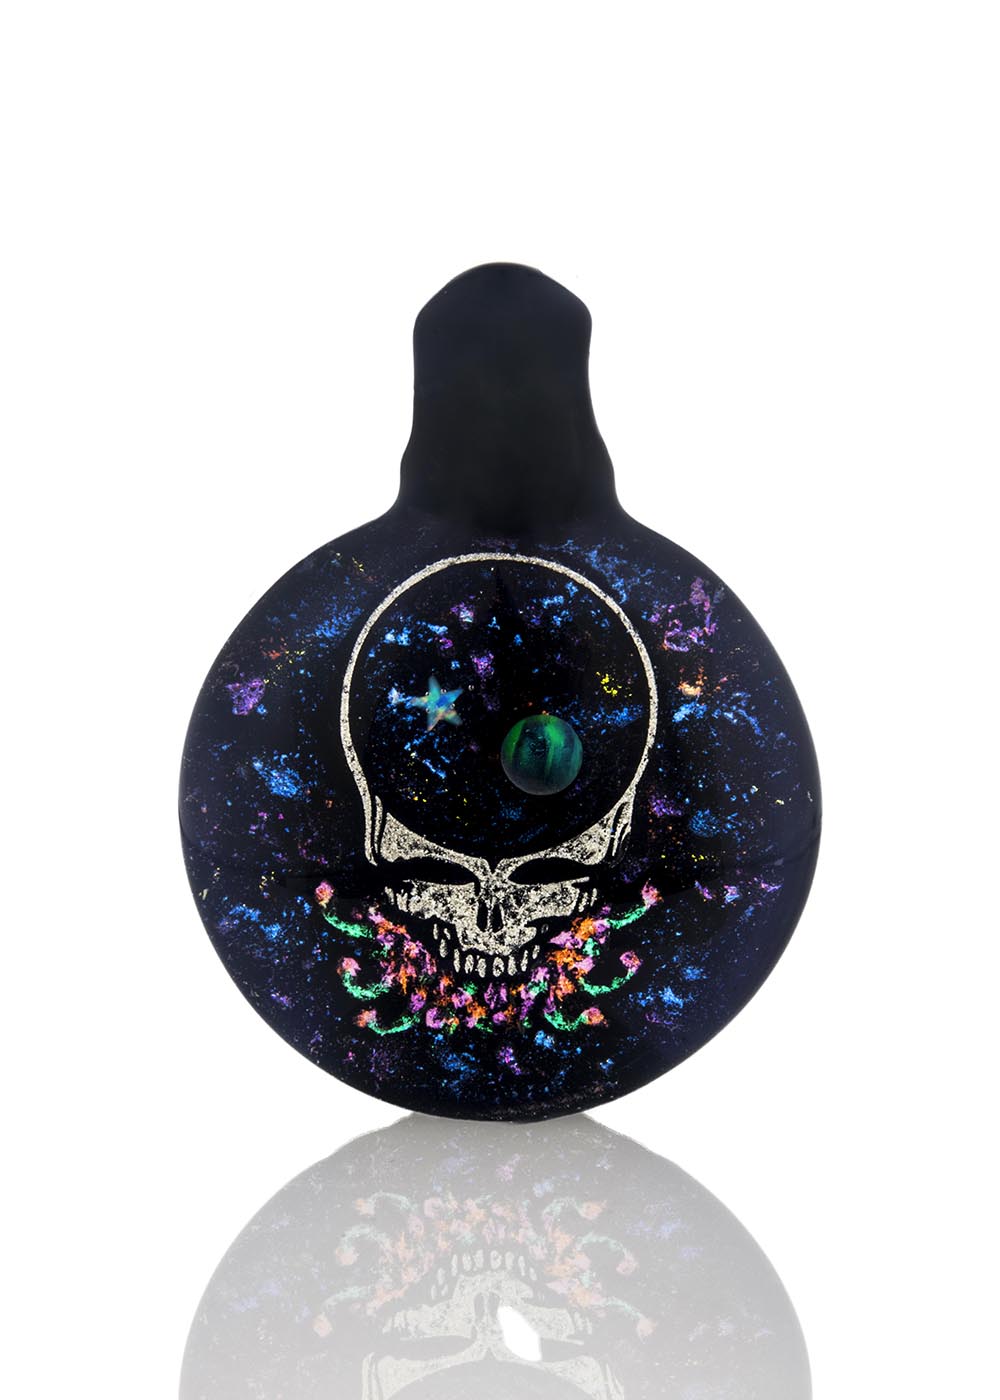 Grateful Dead "Steal Your Galaxy" Dichro Pendant with Opal #2 by Berzerker